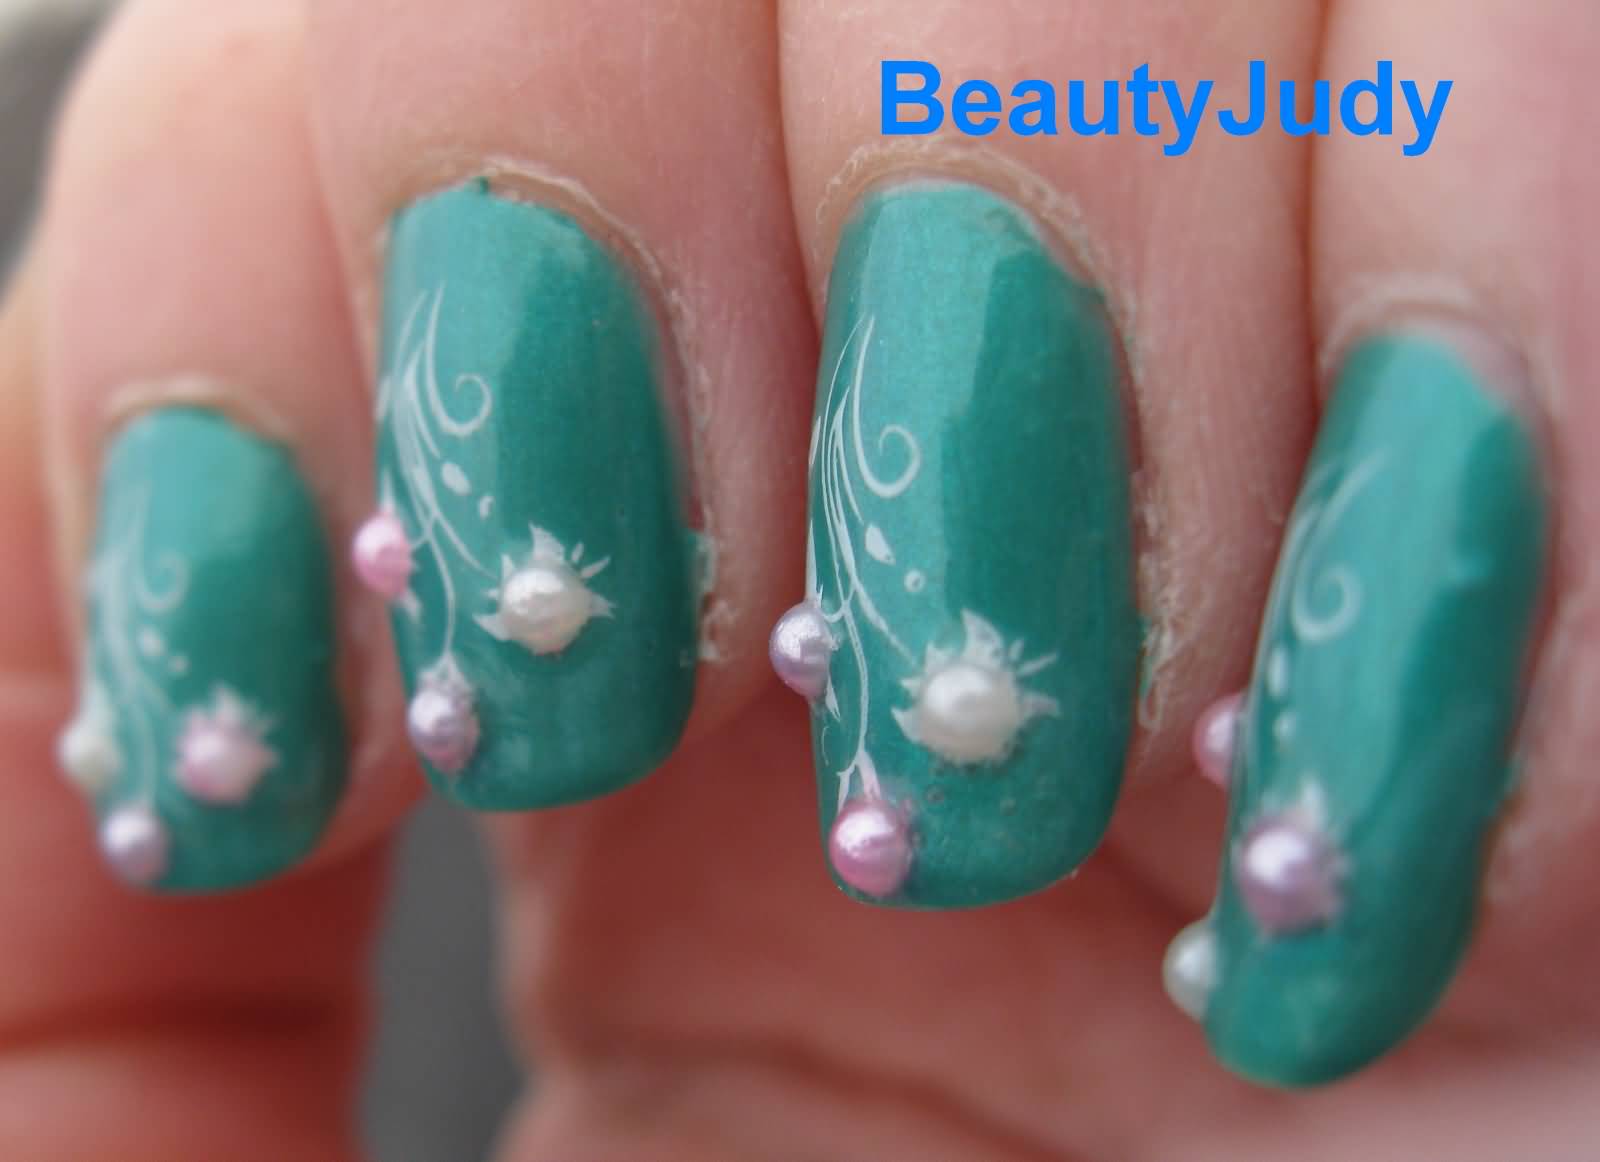 1. Rosary Beads Nail Art Design - wide 5